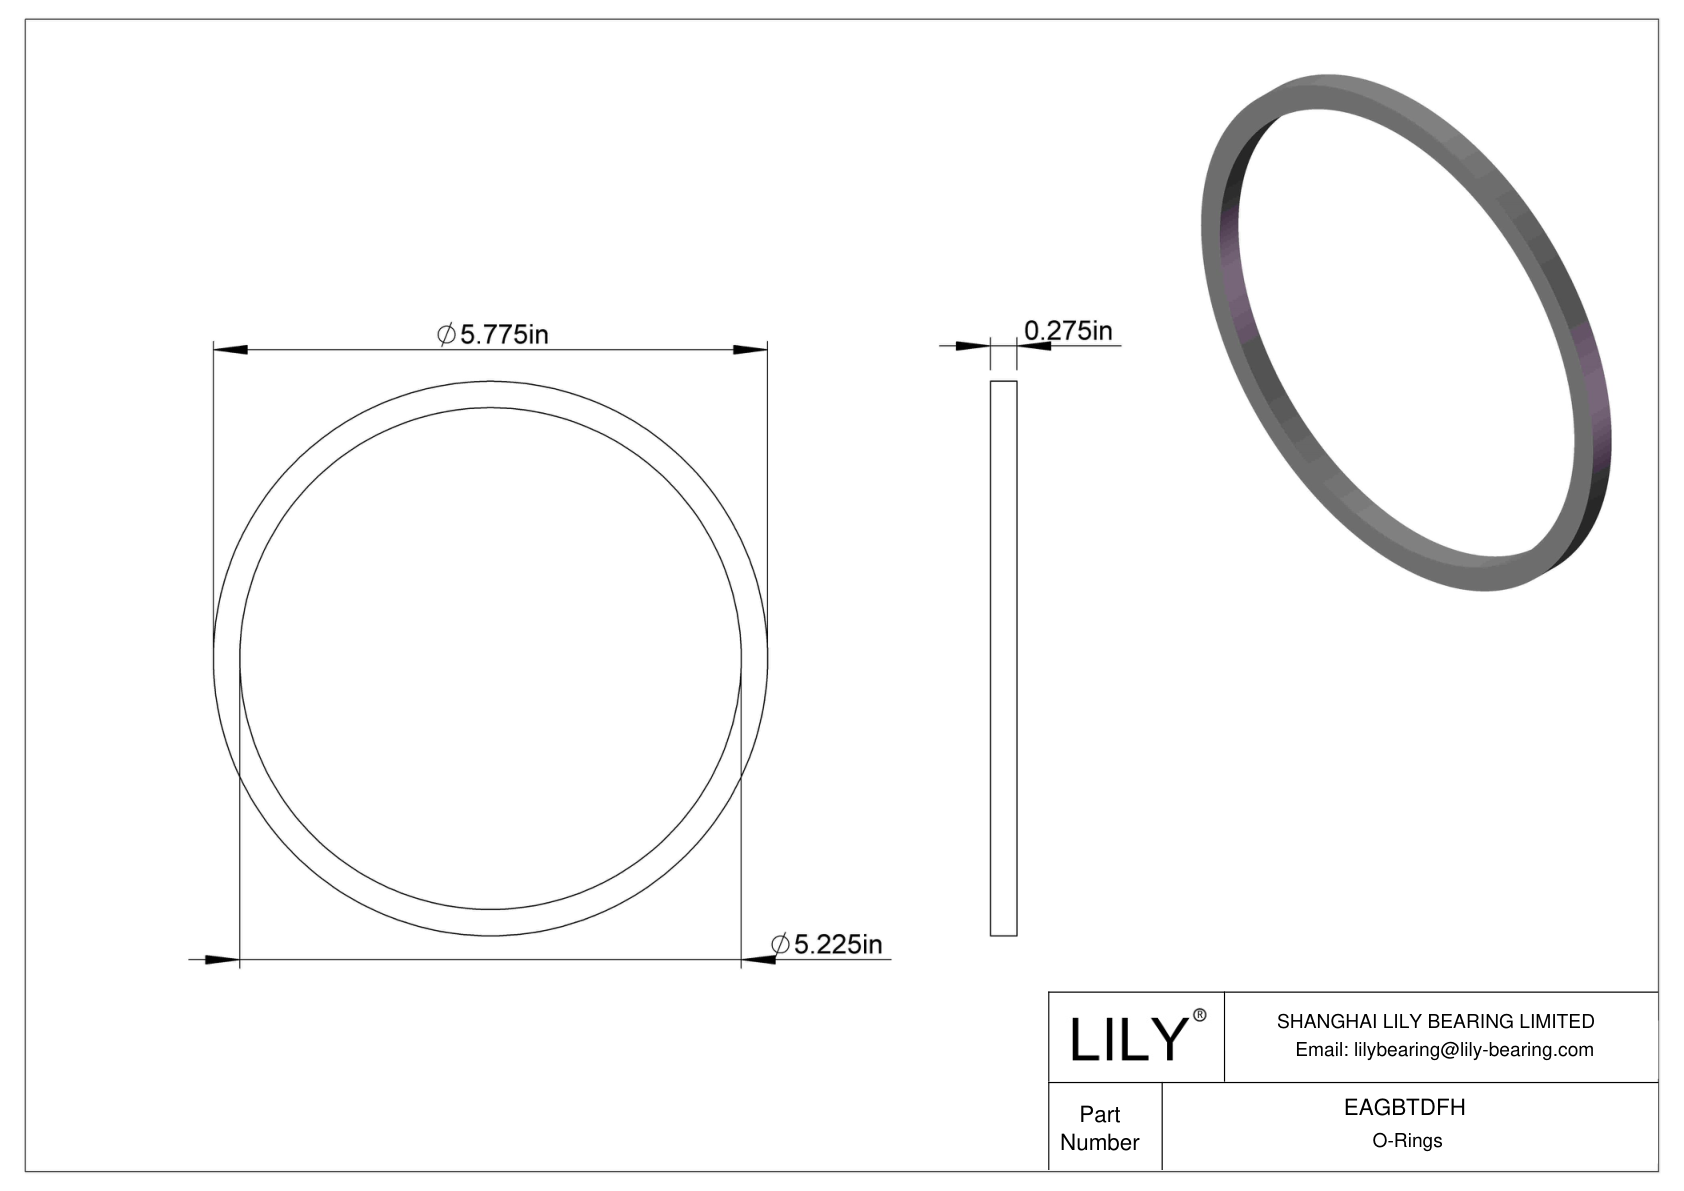 EAGBTDFH Oil Resistant O-Rings Square cad drawing